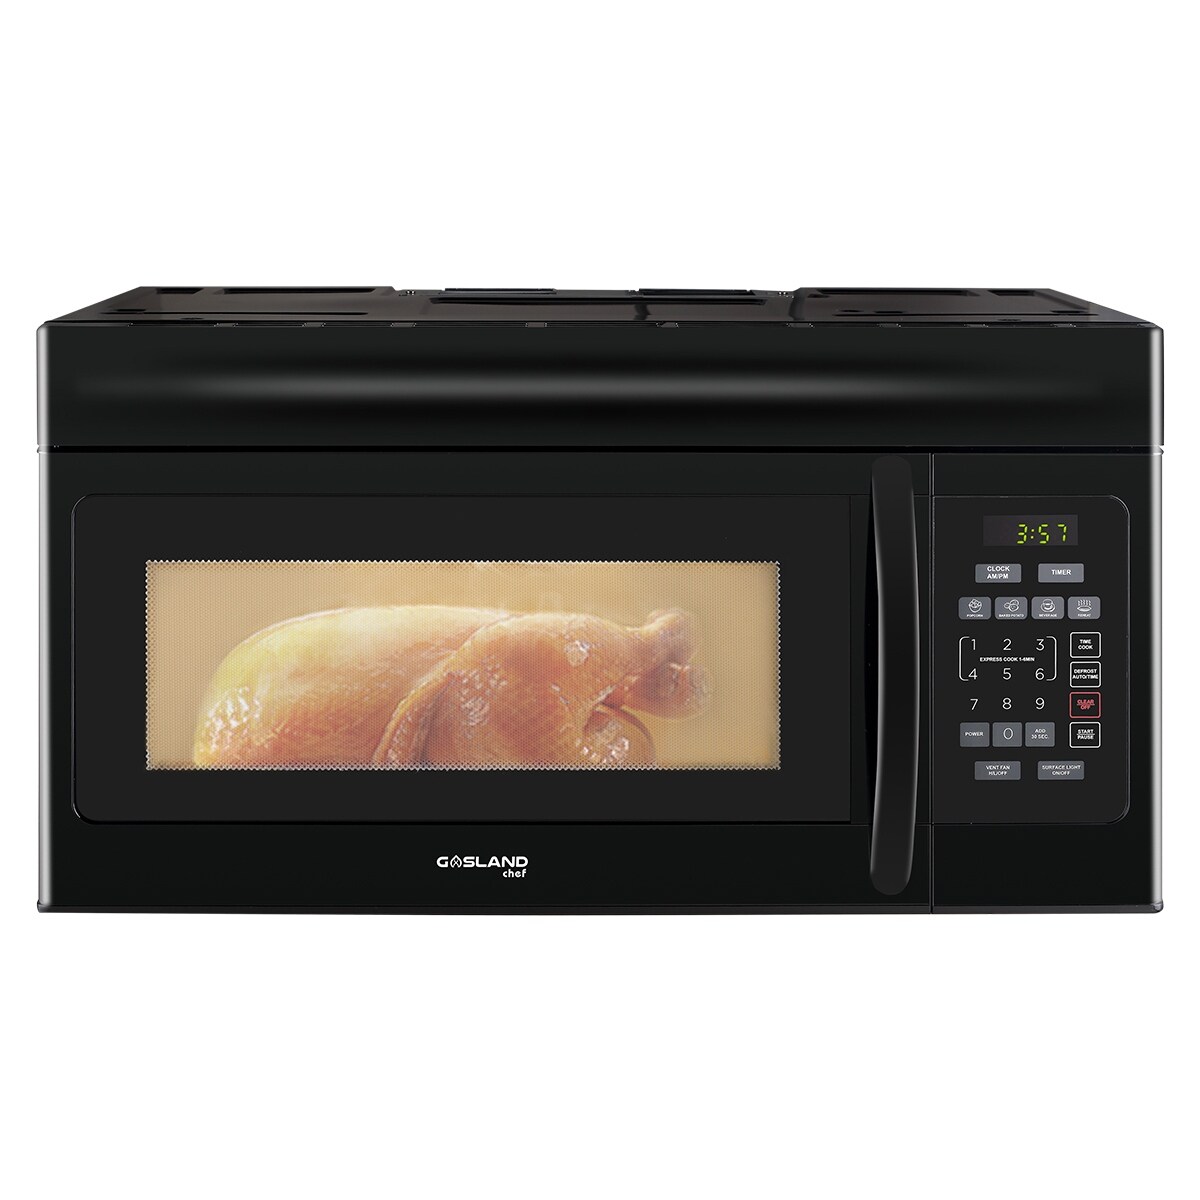 Gasland Chef 30 Inch Over-the-Range Microwave Oven with 1.6 Cu. Ft,1000 Watts,300 CFM in Black,13" Glass Turntable,Easy Clean